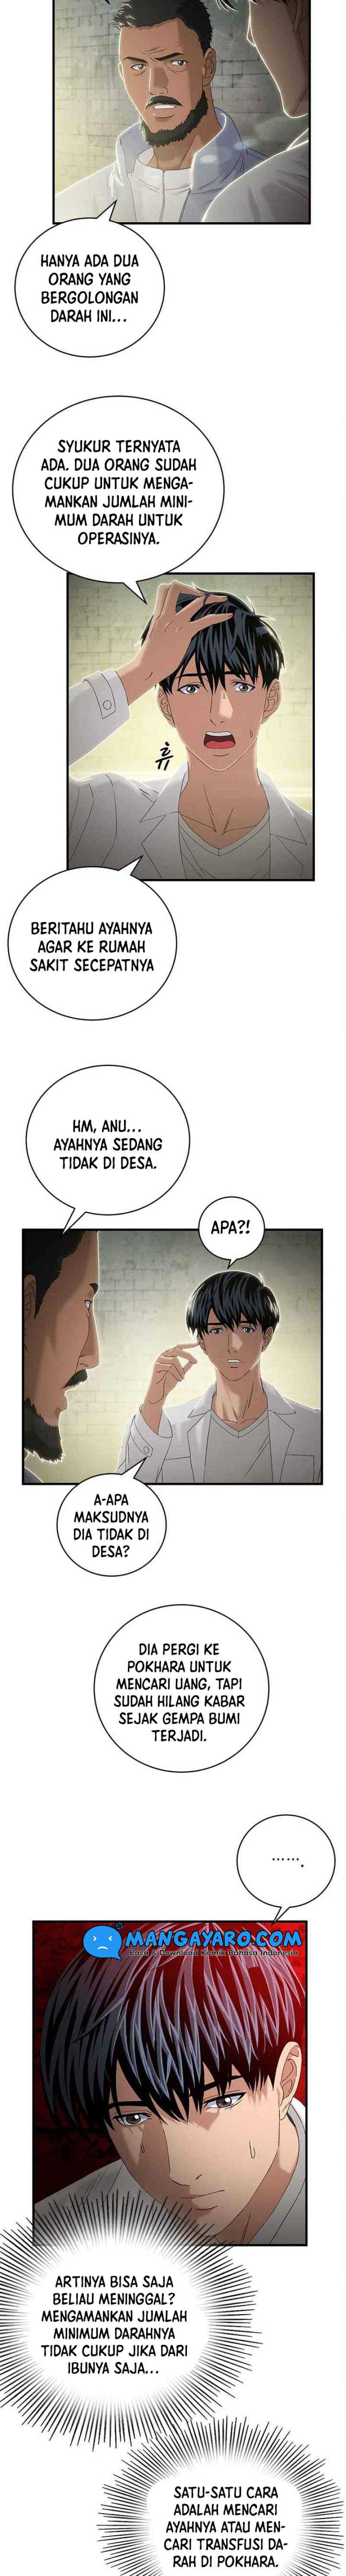 Dr. Choi Tae-Soo Chapter 63